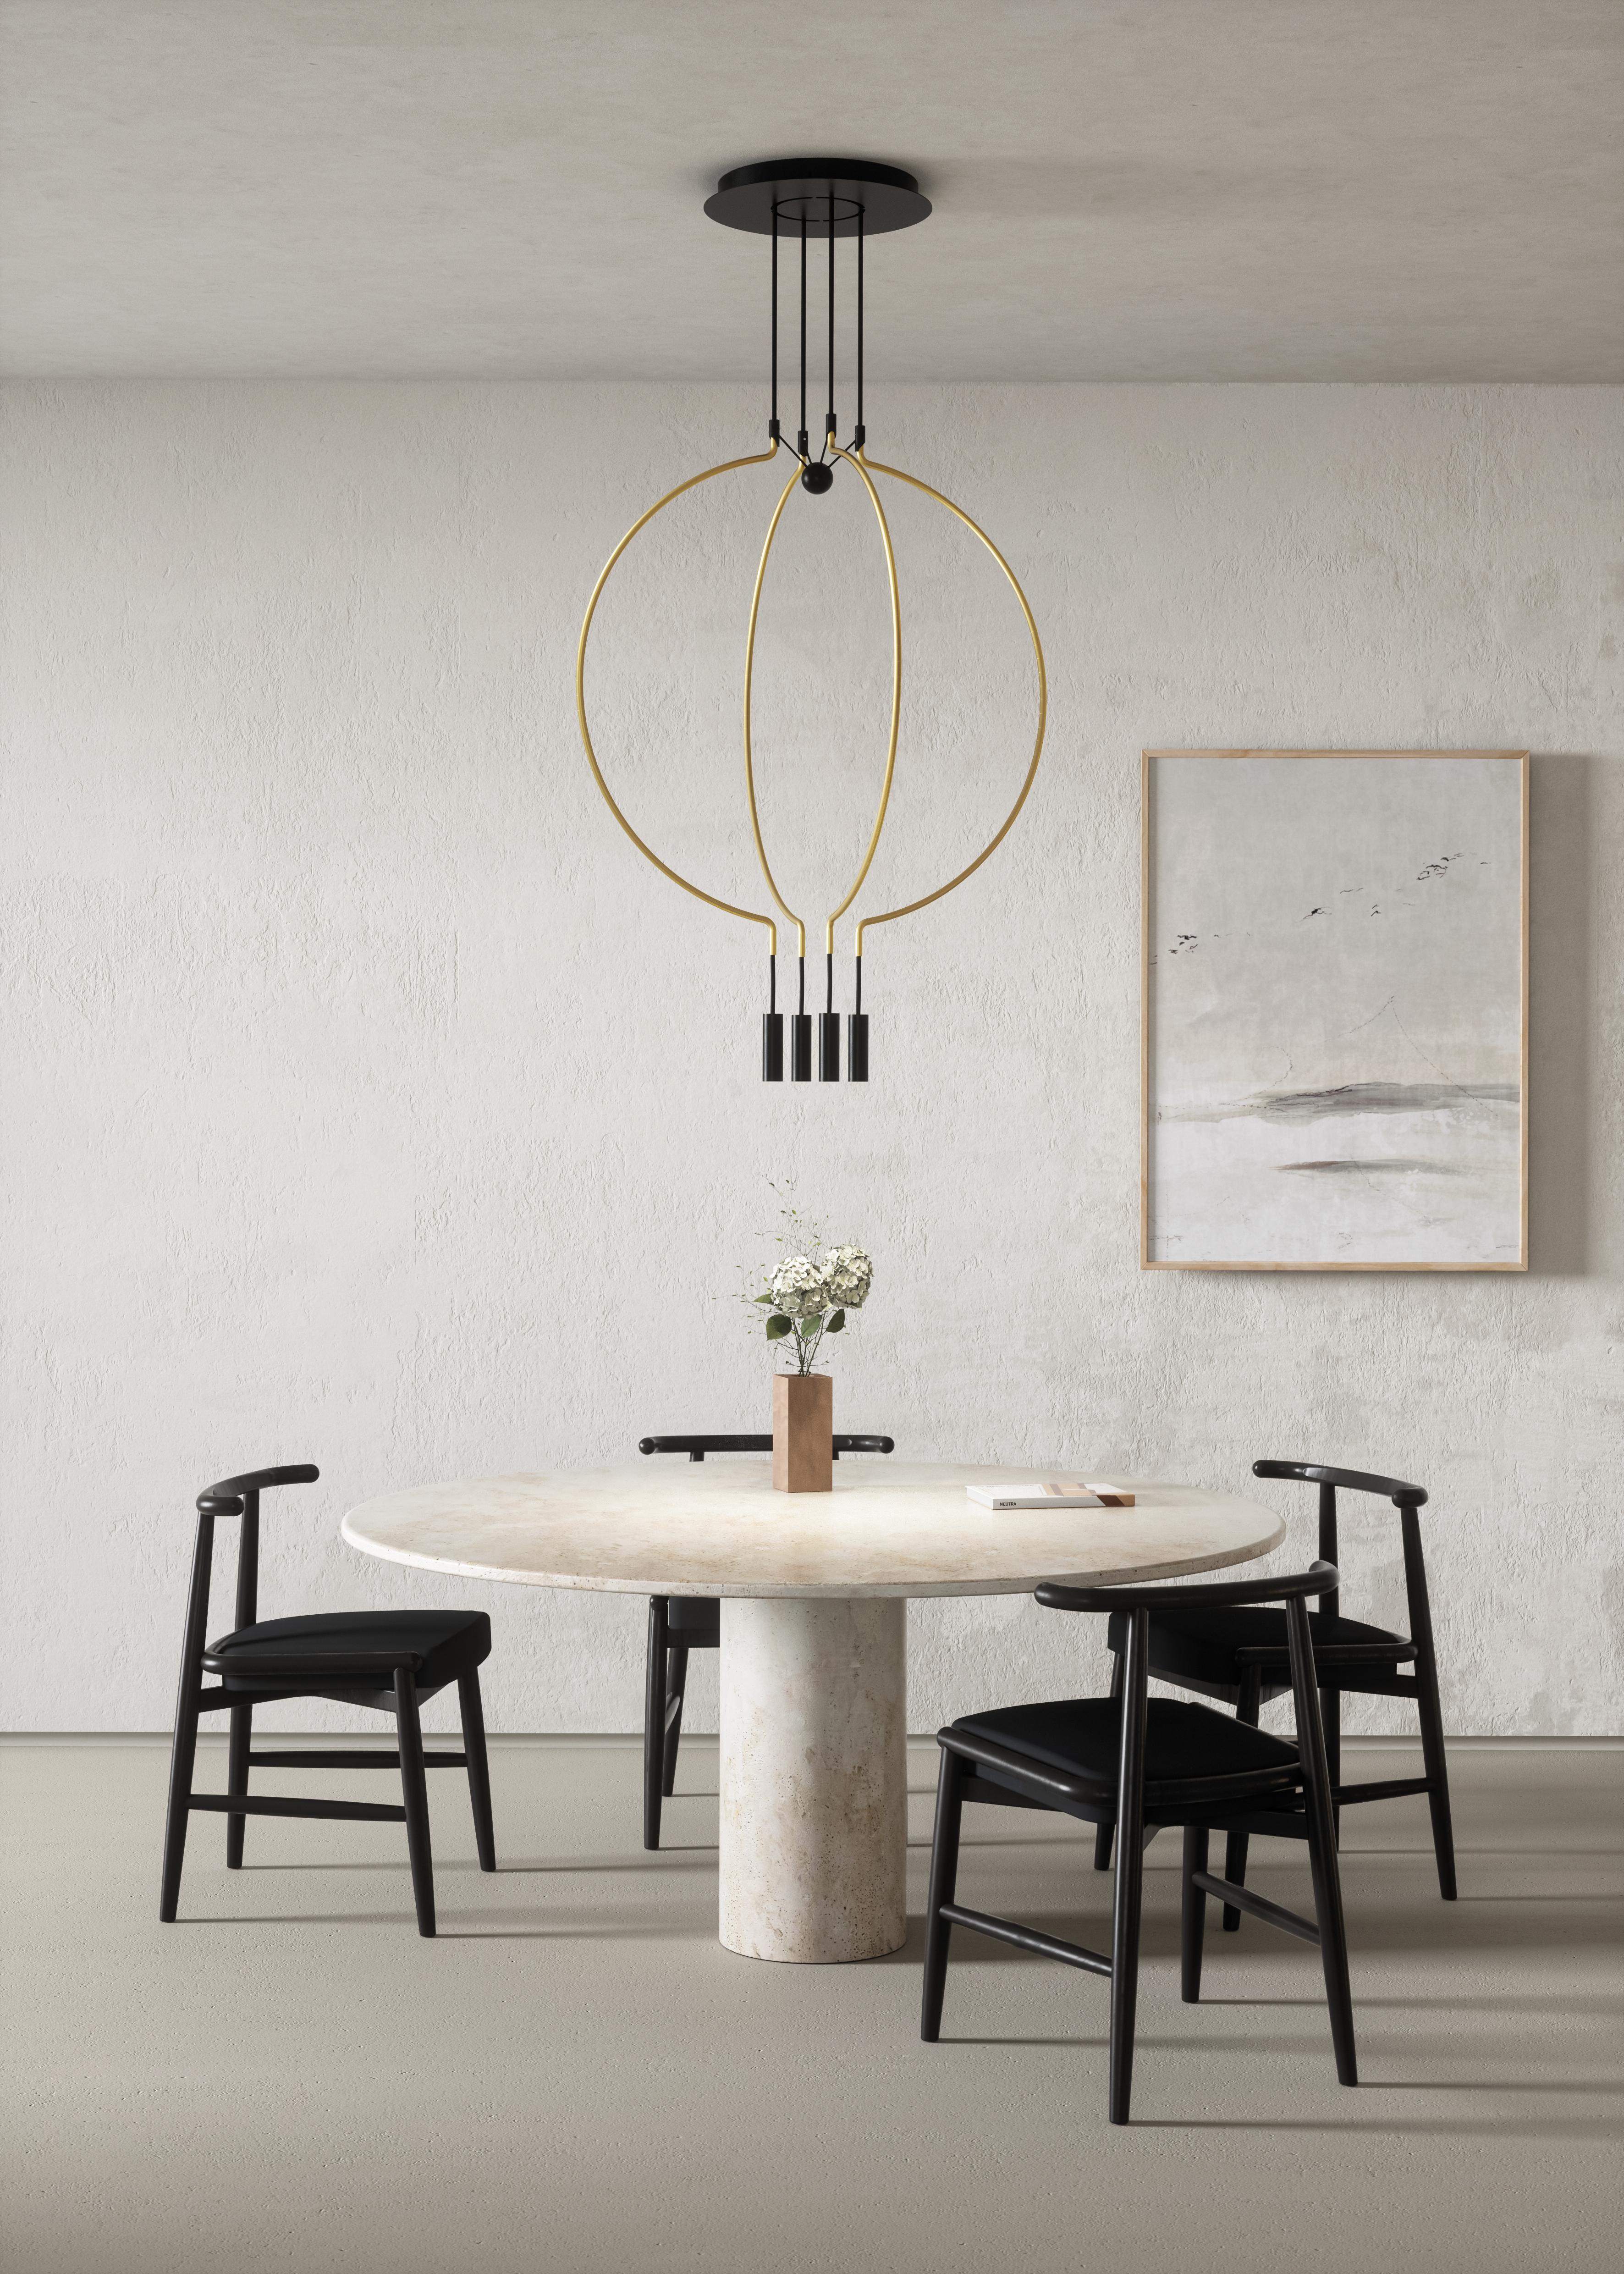 Axolight Liaison Model P8 Pendant Lamp in Black/Gold by Sara Moroni

Modular lightness and elegance. Liaison tells about the perfect balance of three geometric archetypes: sphere, circle and cylinder compose a system that includes the single pendant